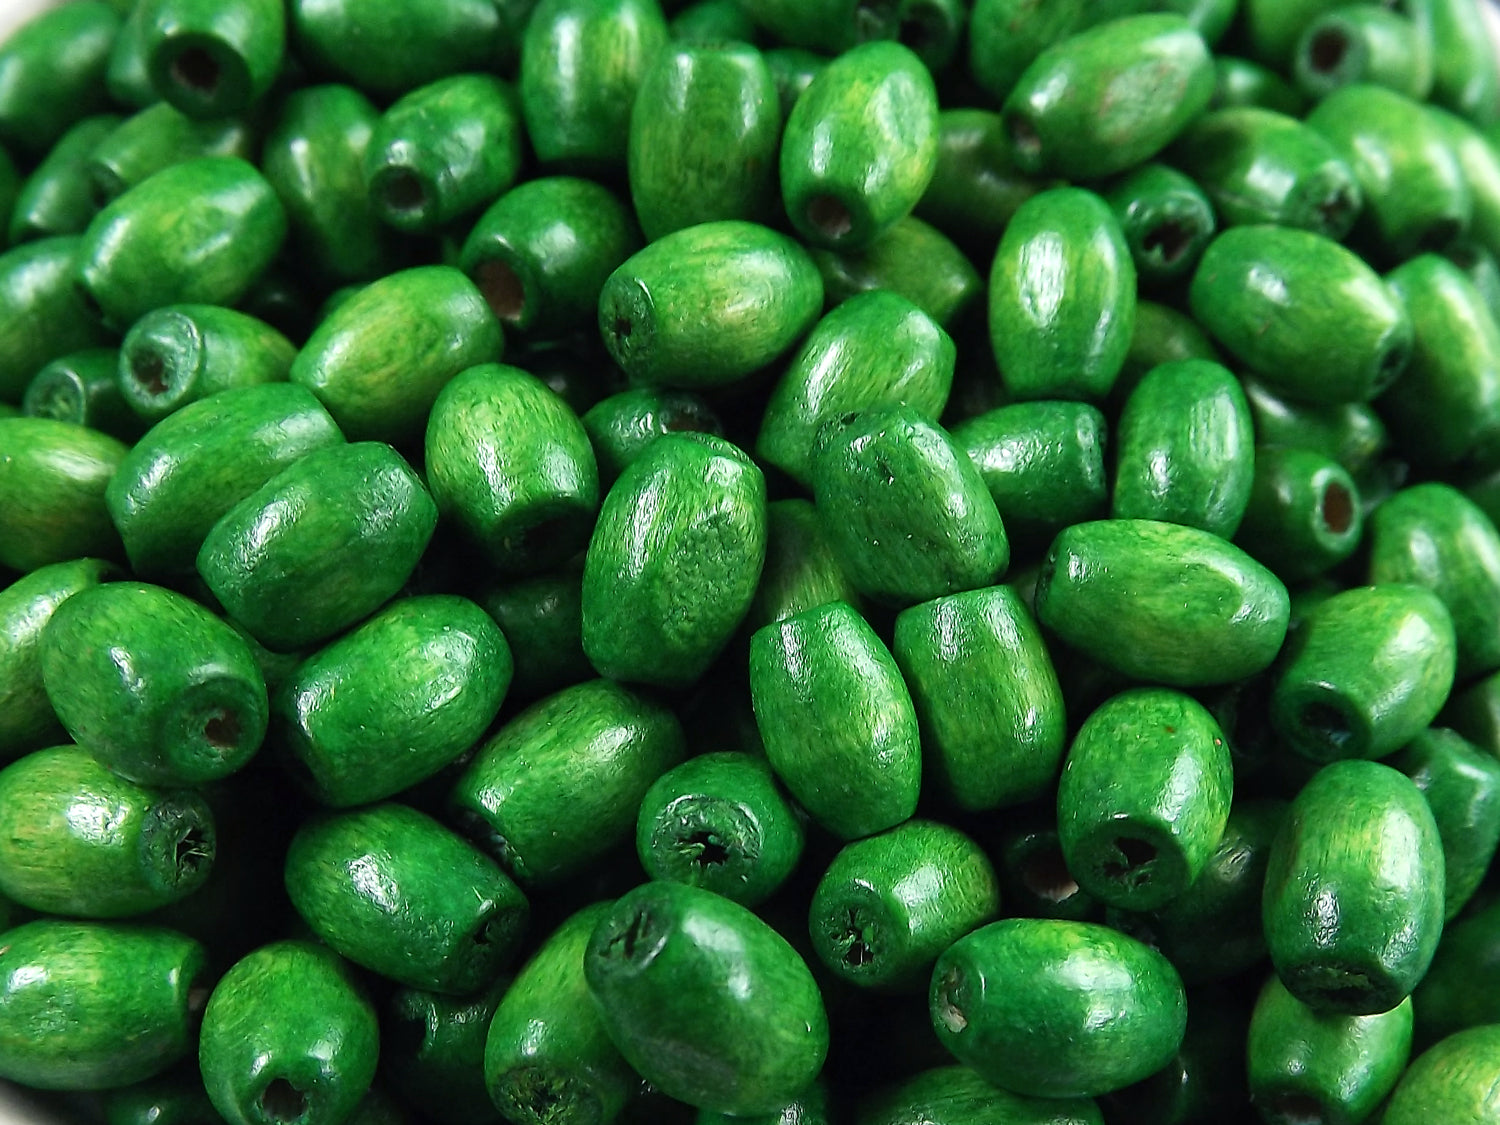 Shamrock Green Wood Oval Rice Tube Beads Satin Varnished Plain Simple Smooth Ball Wooden Bead Spacers 8mm Choose 50pcs, 200pcs or 400pcs